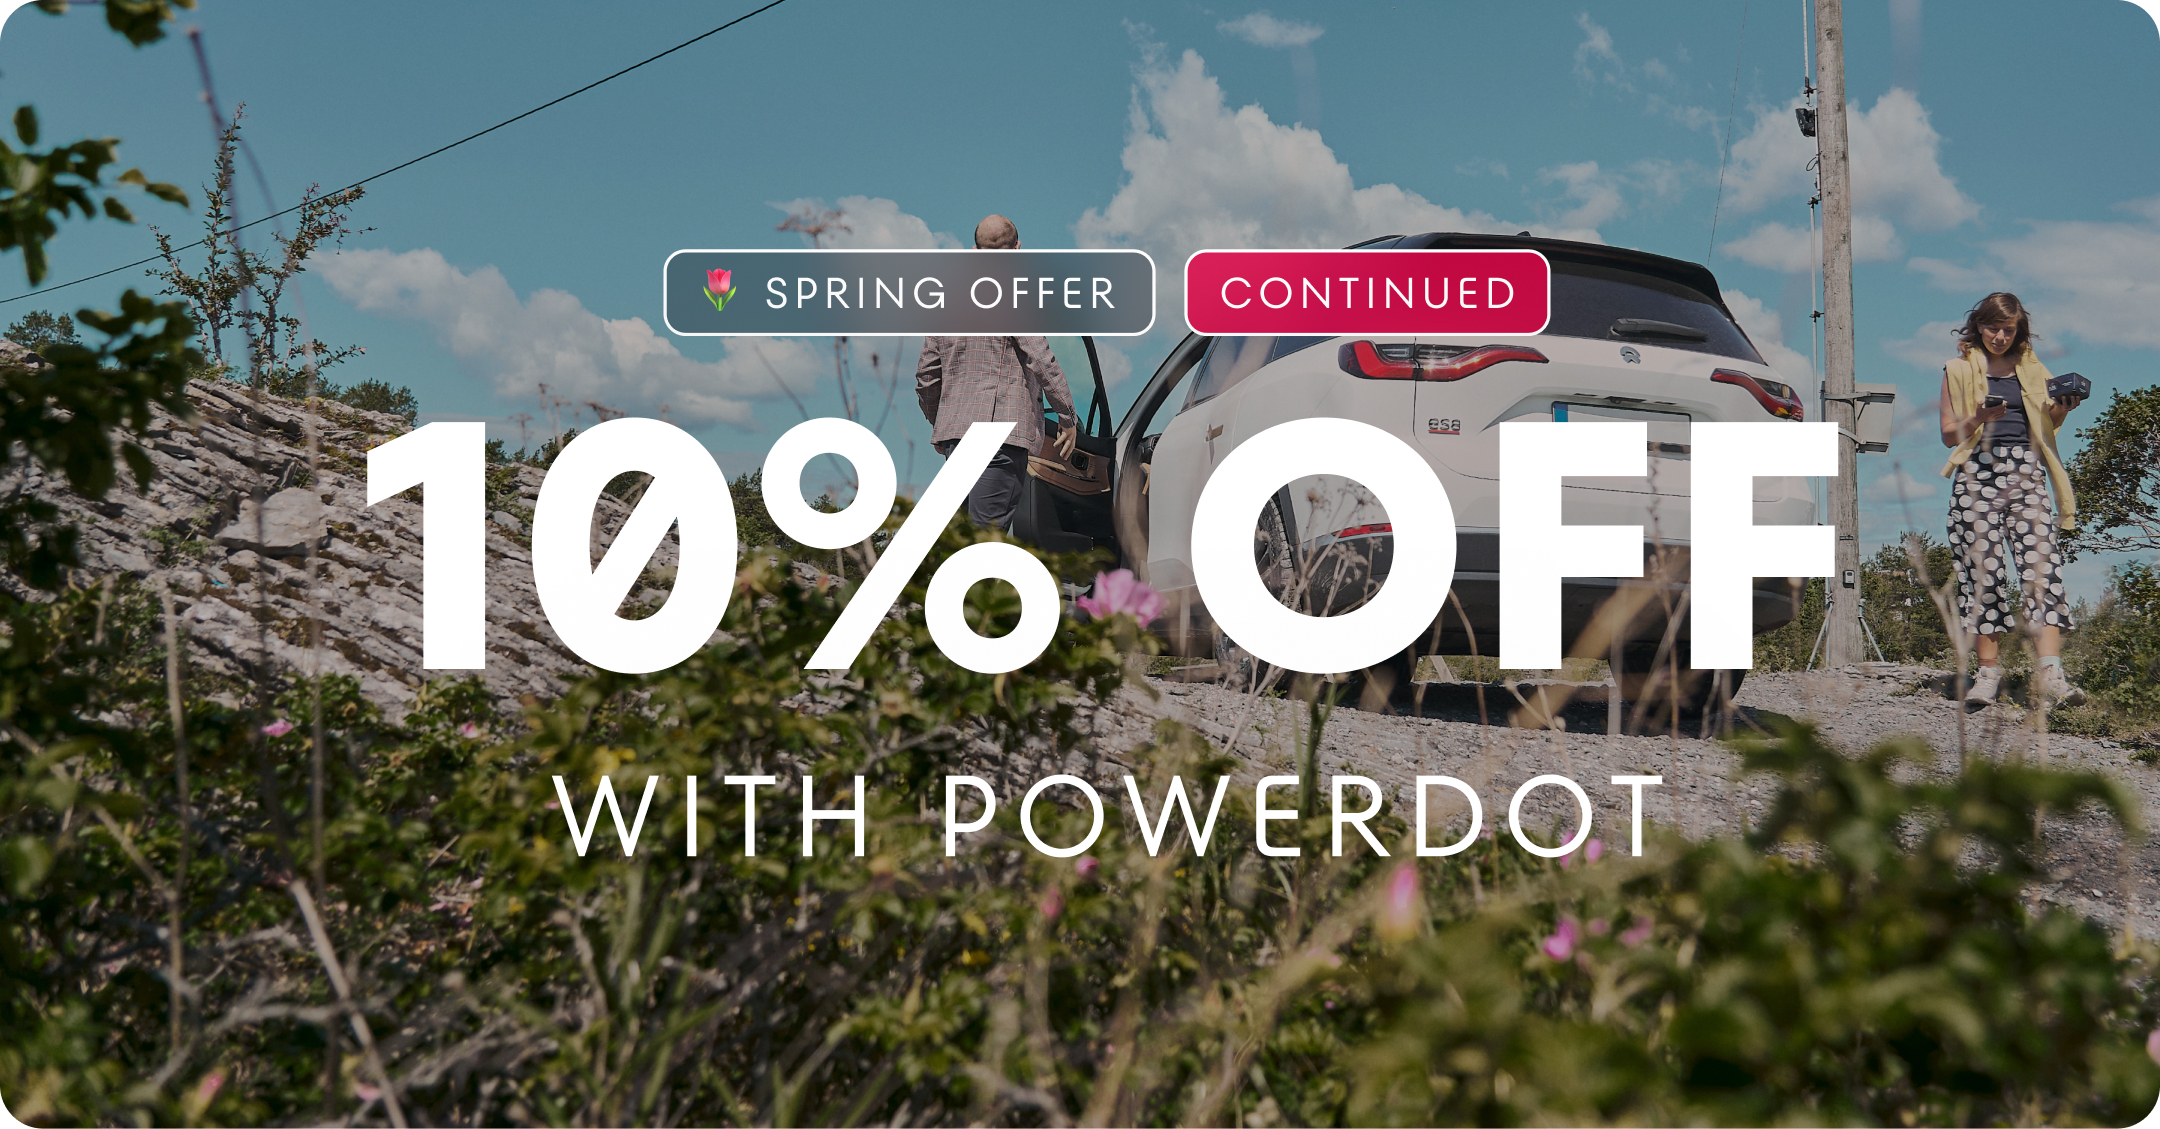 Save 10% with Powerdot